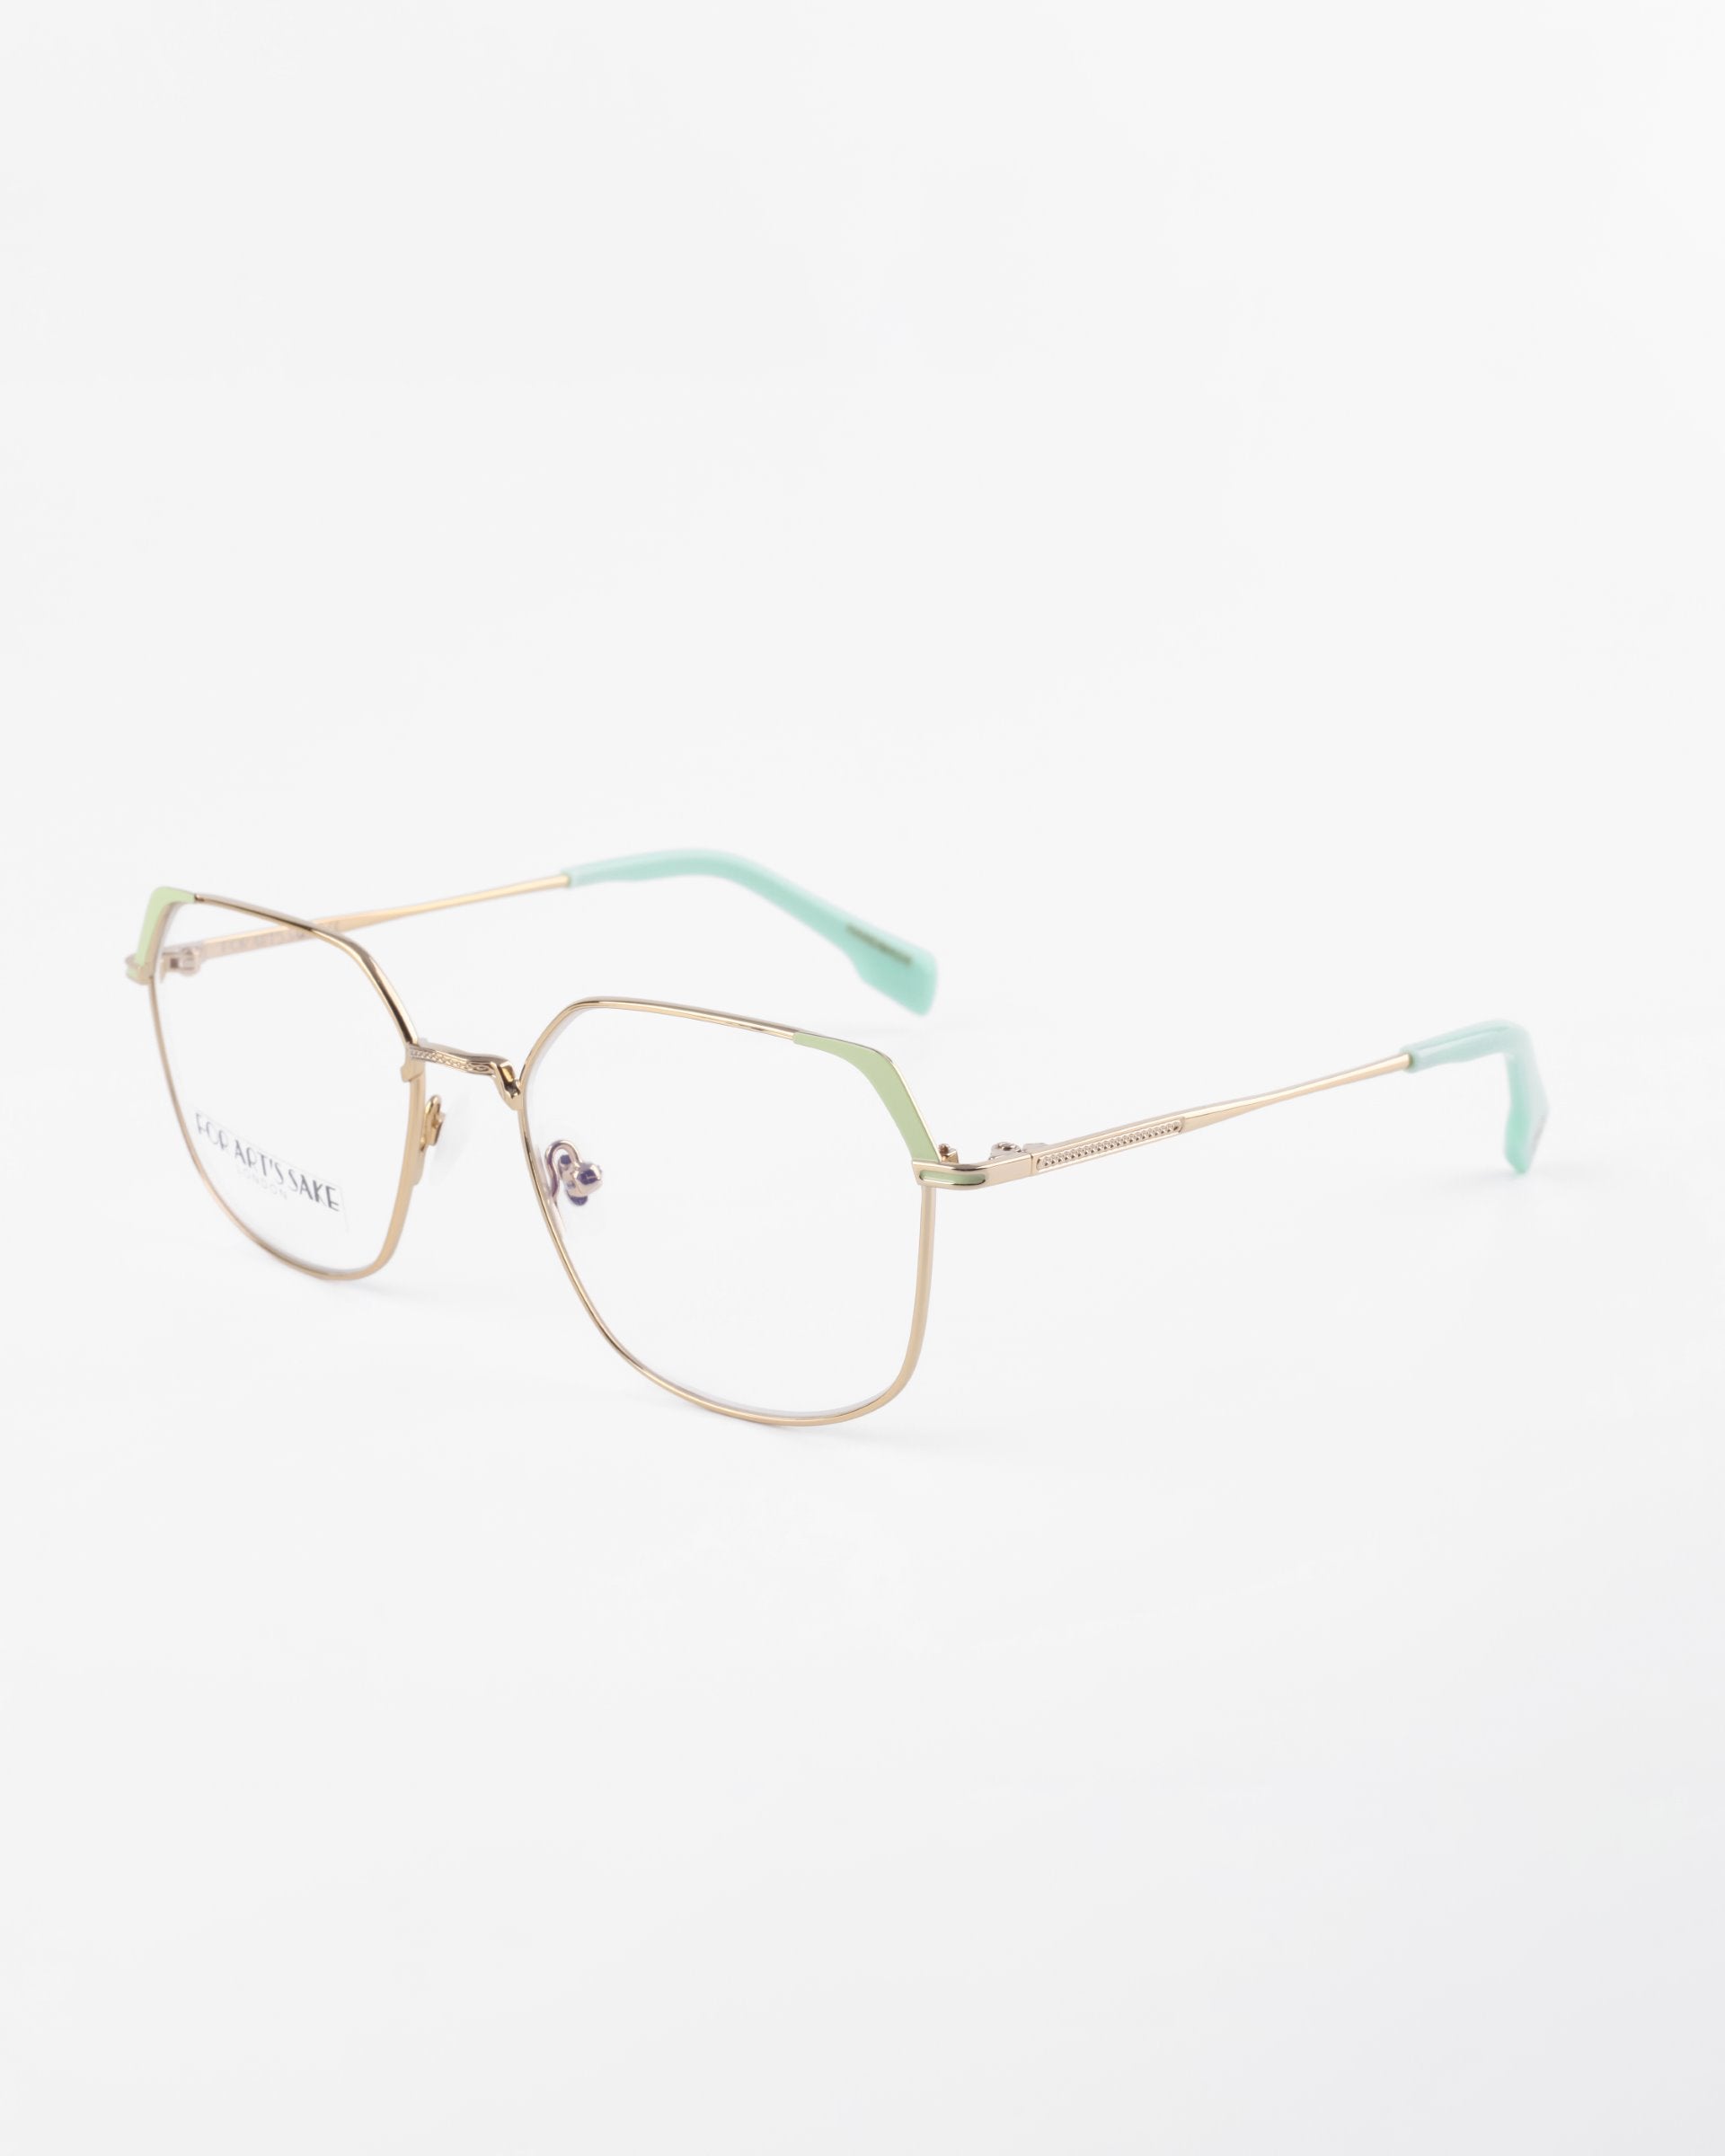 A pair of eyeglasses with gold wire frames and rectangular lenses, featuring mint green accents on the temples and end tips of the arms. These stylish glasses, named Godiva by For Art&#39;s Sake®, also come with optional prescription lenses. Displayed against a white background, they elegantly blend fashion with functionality.